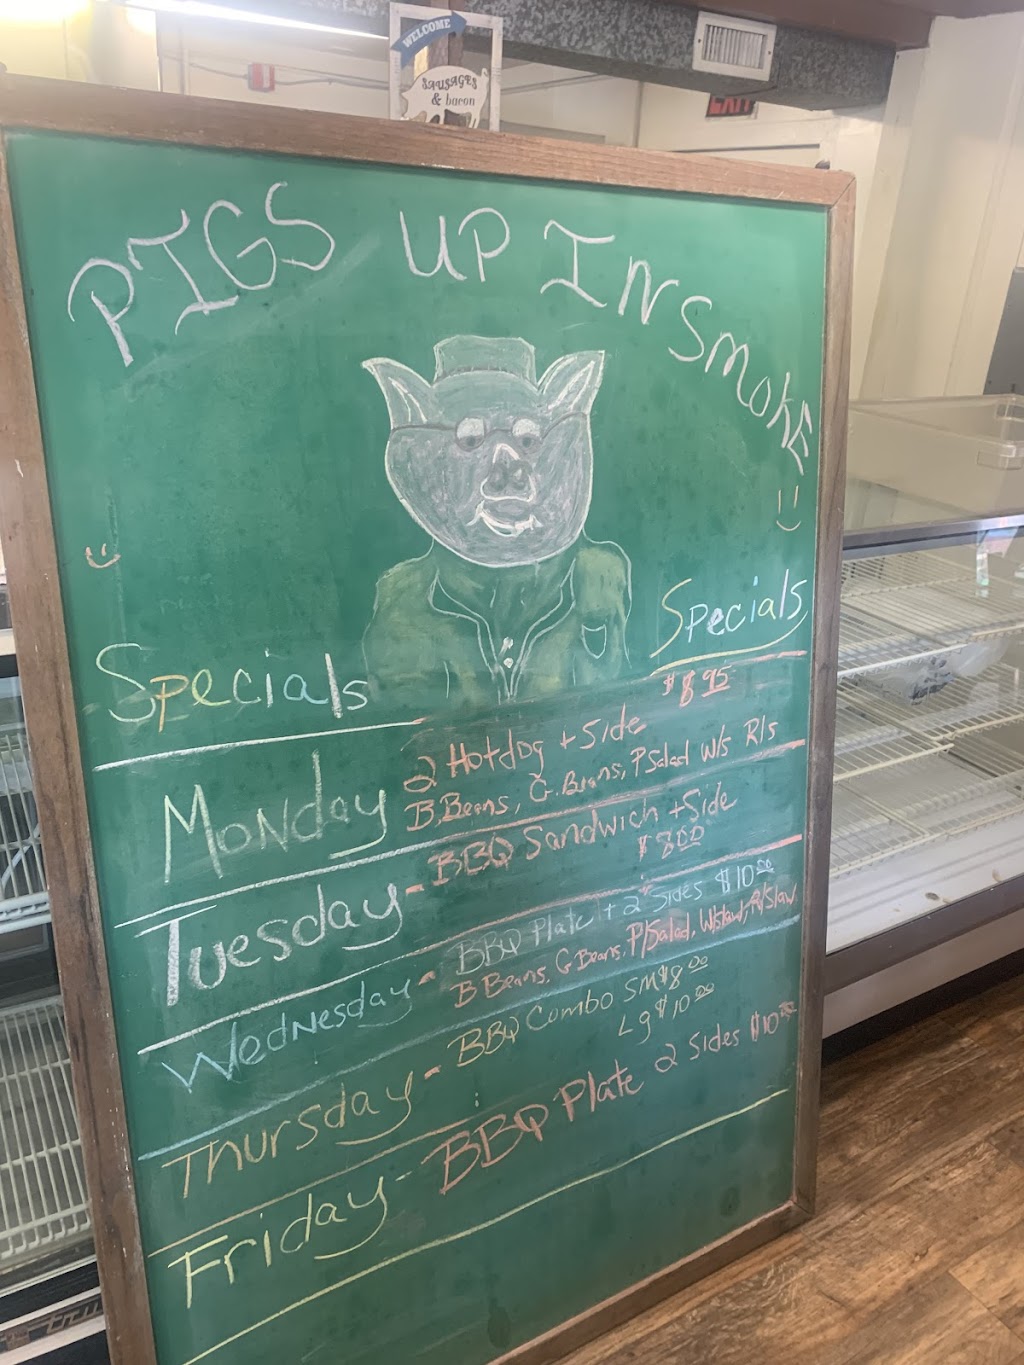 Pigs up in smoke bbq | restaurant | 1542 Hickman Rd NW, Calabash, NC 28467, USA | 9102876652 OR +1 910-287-6652